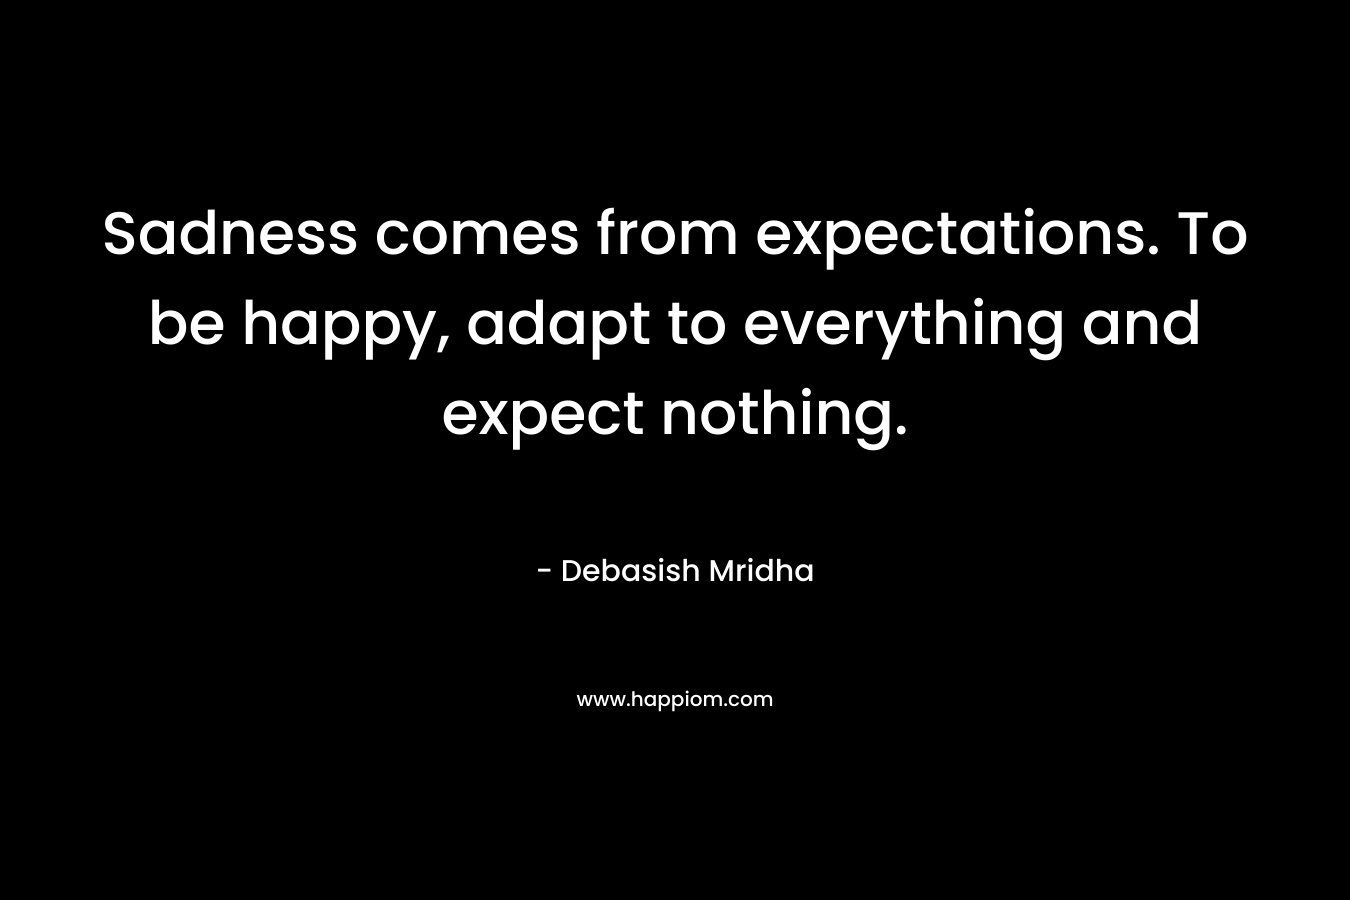 Sadness comes from expectations. To be happy, adapt to everything and expect nothing. – Debasish Mridha